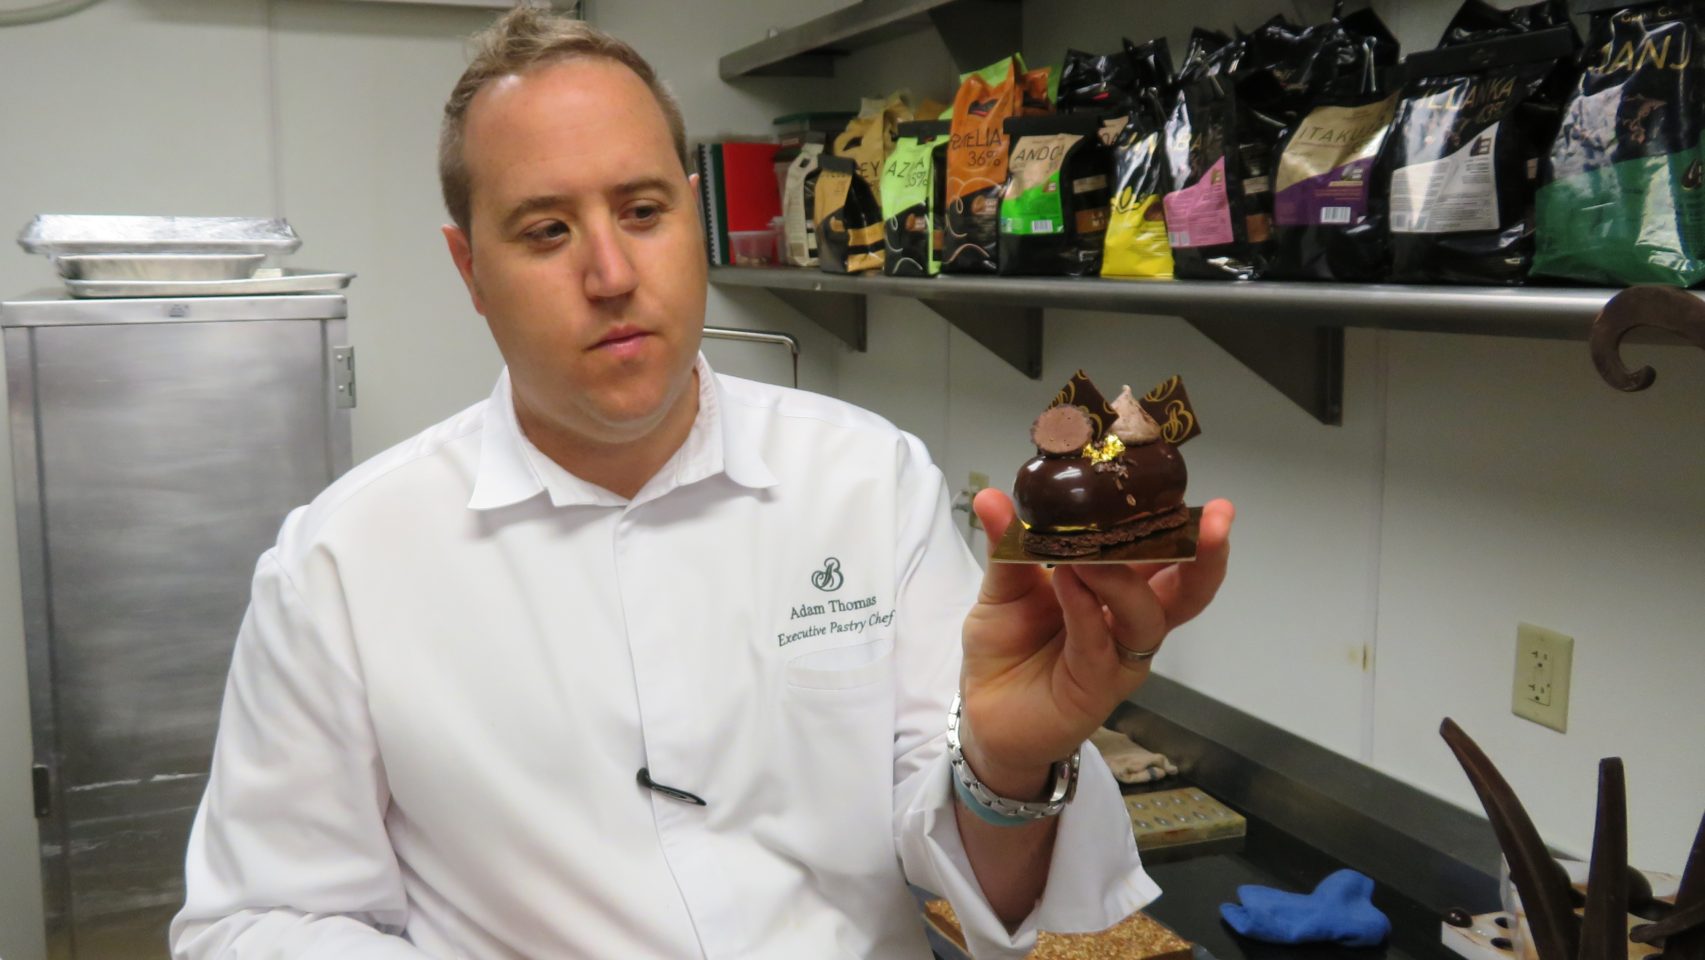 Culinary Excellence at <em><strong>The Broadmoor</strong> </em>~ Executive Pastry Chef Adam Thomas with one of his divine chocolate creations